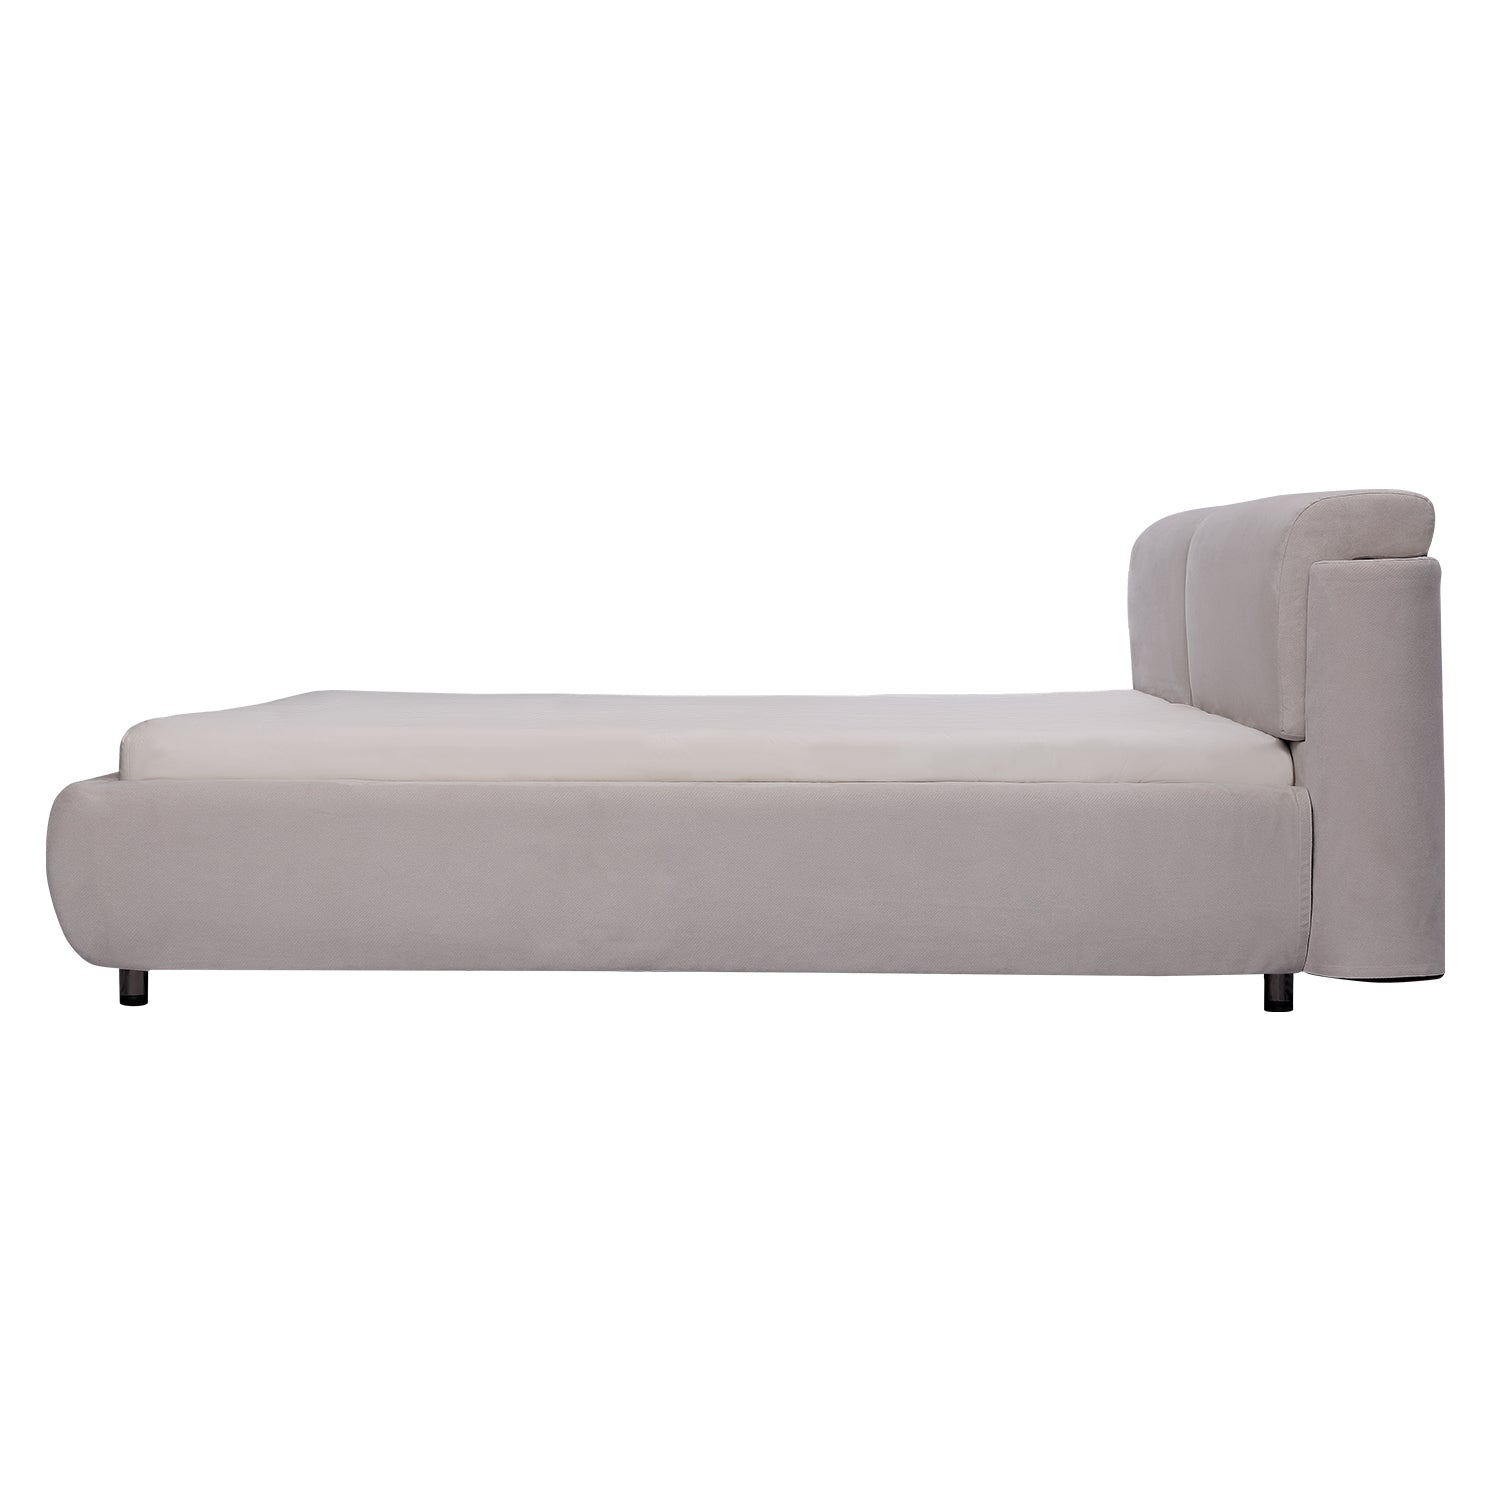 Side view of DeRUCCI Bed Frame BZZ4 - 082 with a modern minimalist design, upholstered fabric, and low-profile structure.